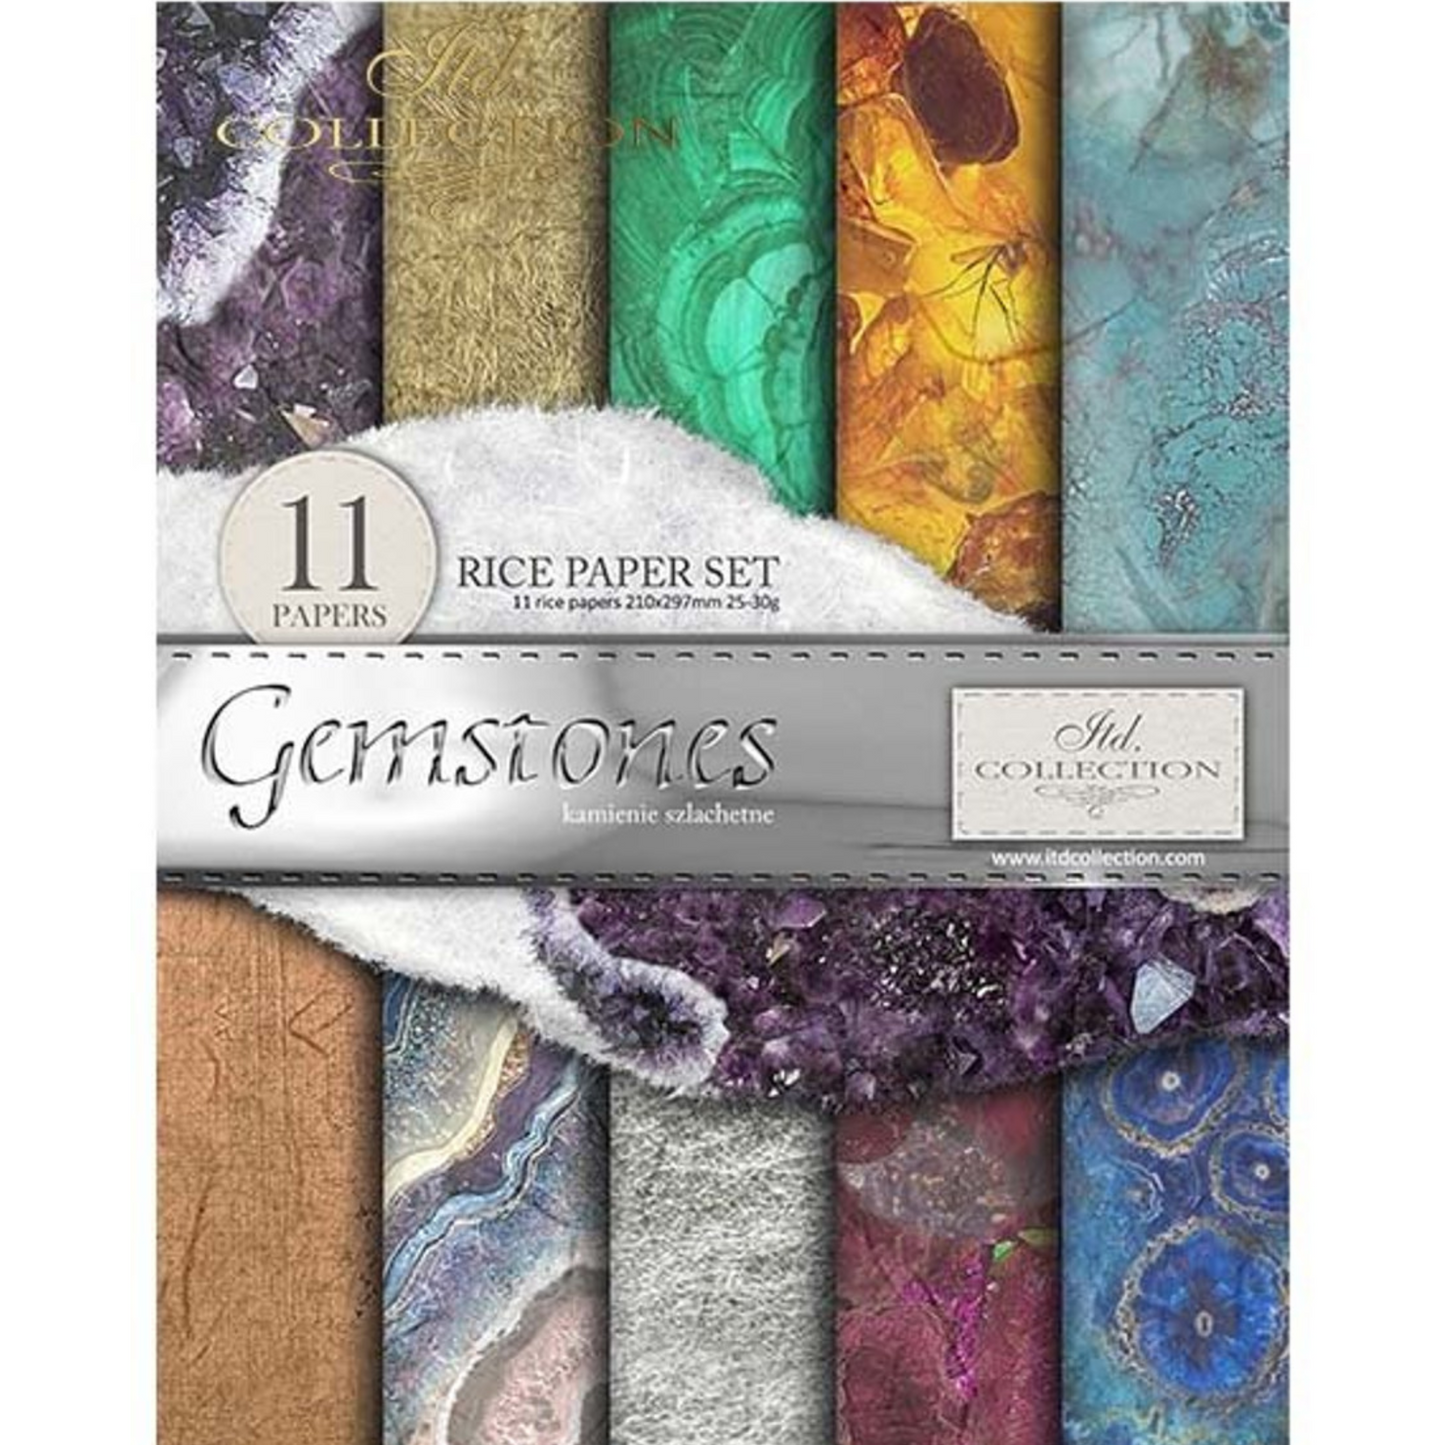 "Gemstones" decoupage rice paper 11 sheet set in size A4 available at Milton's Daughter. Front cover photo.